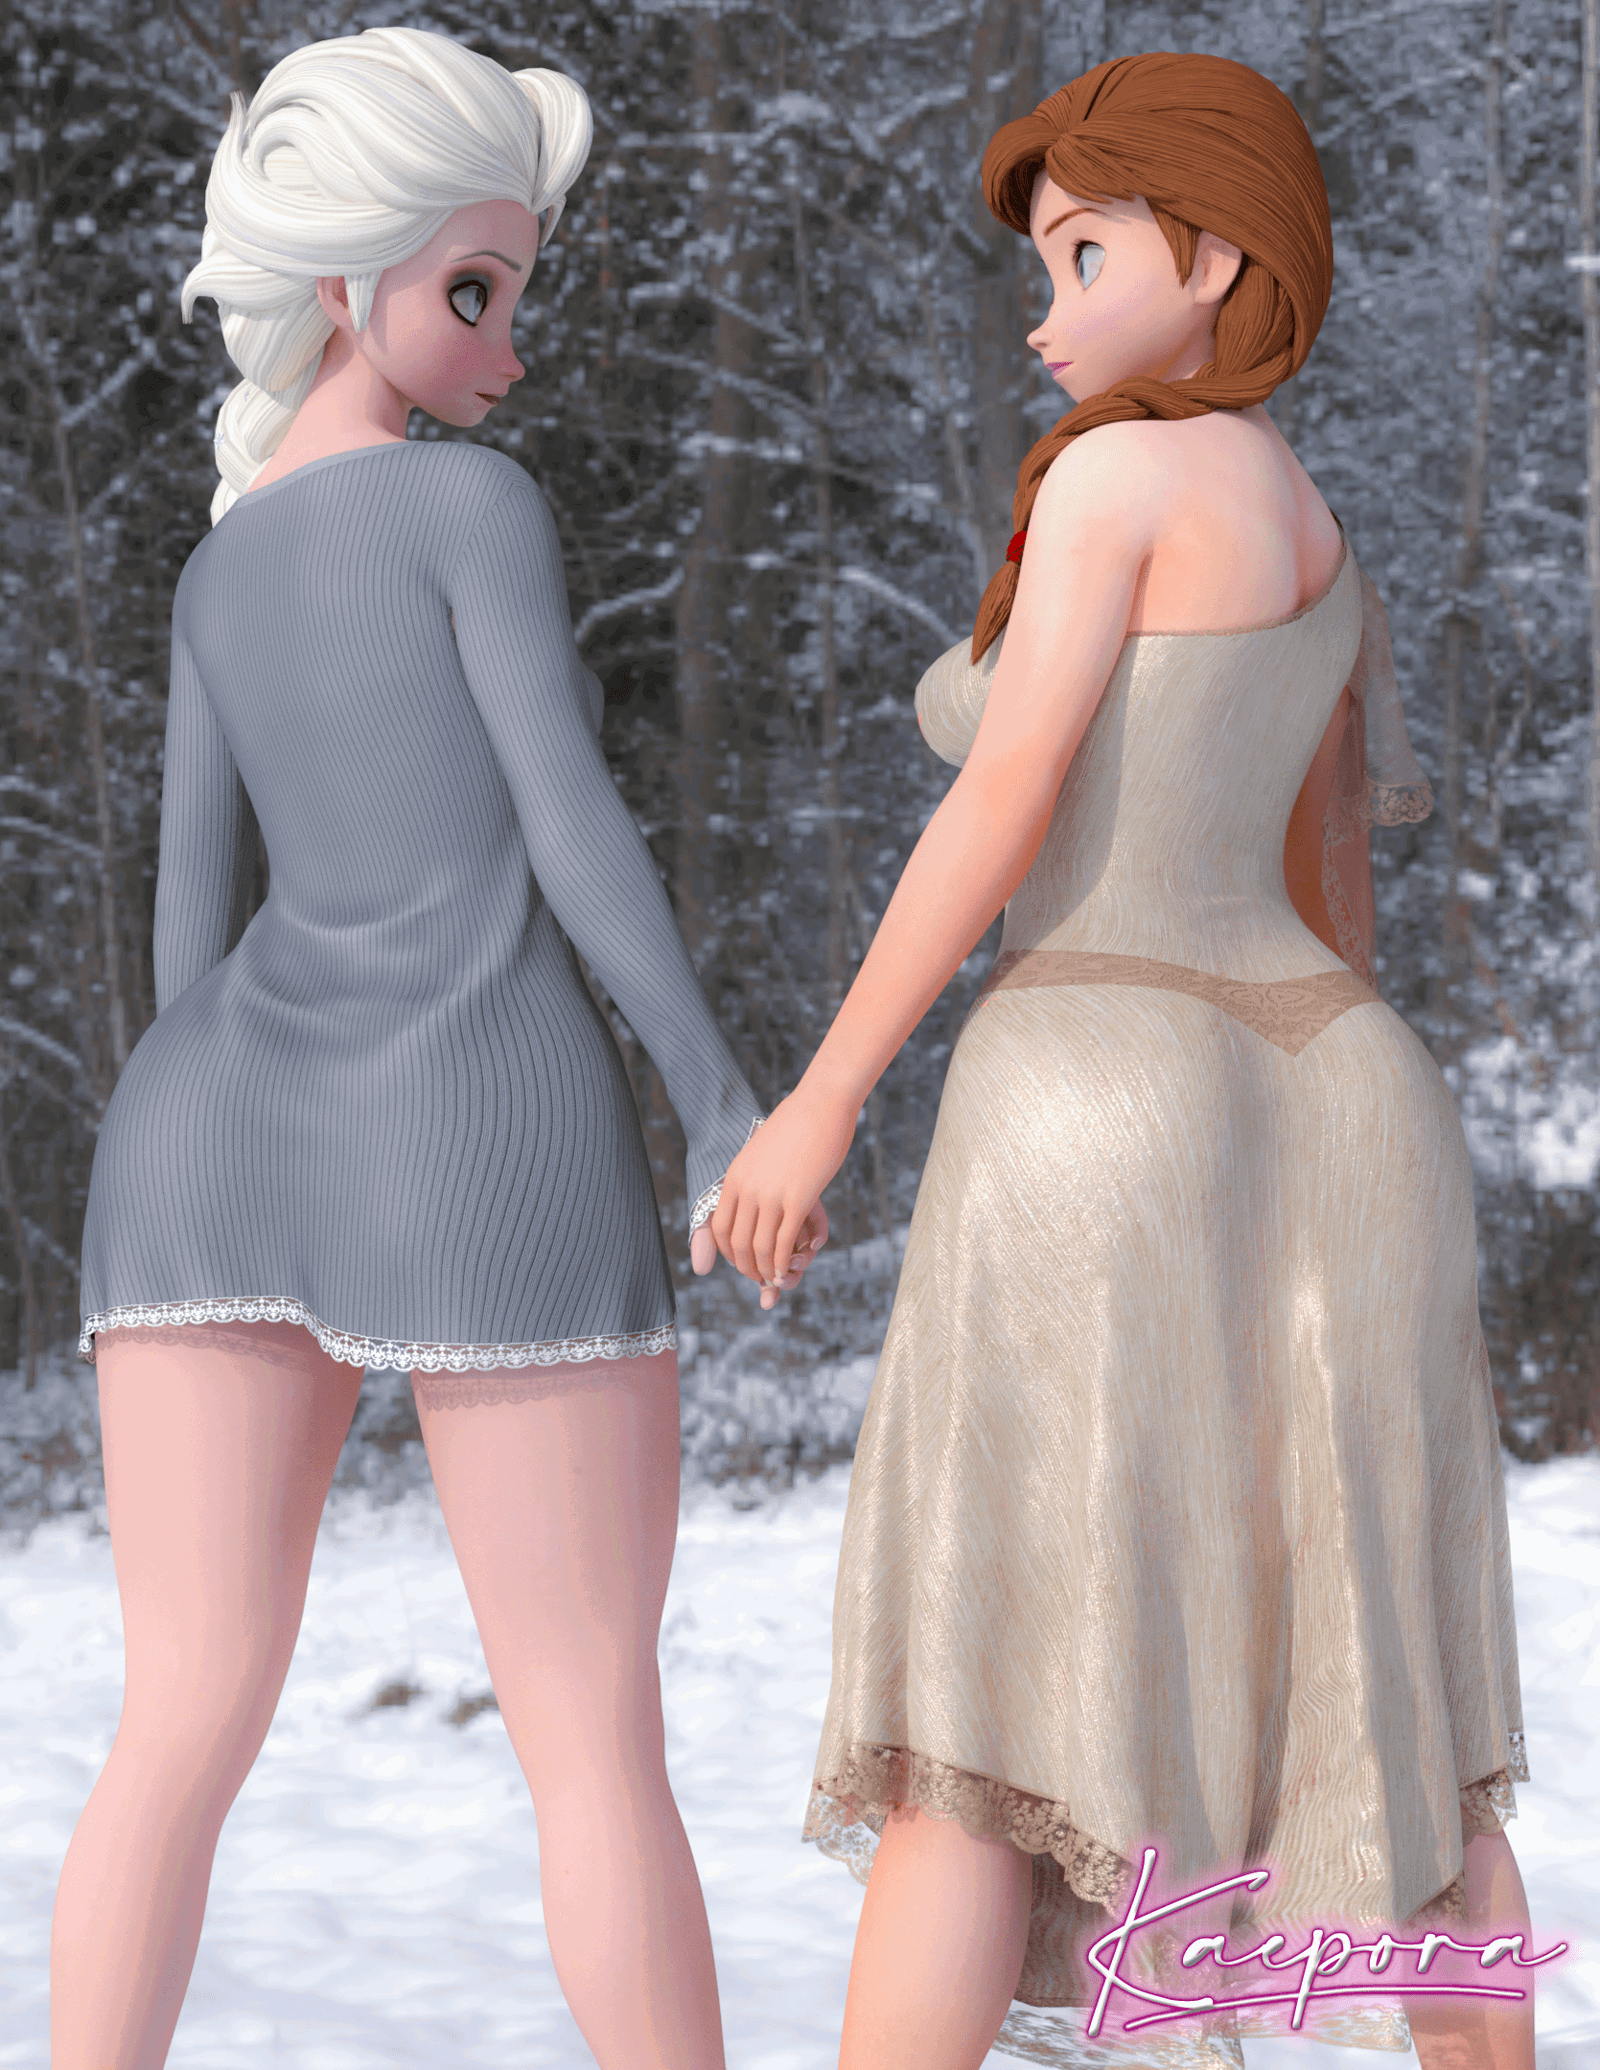 Photo by Kaepora futa Queen with the username @KaeporaNSFW, who is a verified user,  March 28, 2022 at 11:55 AM. The post is about the topic 3D Porn and the text says 'Cute moment between sisters ❤️

all Stories about Elsa & Anna and more still available on slushe:
https://slushe.com/Kaepora

exclusives pics in 4K! join my Patreon and get some lewd content ❤️
https://patreon.com/KaeporaNSFW

#NSFWart #Futanari..'